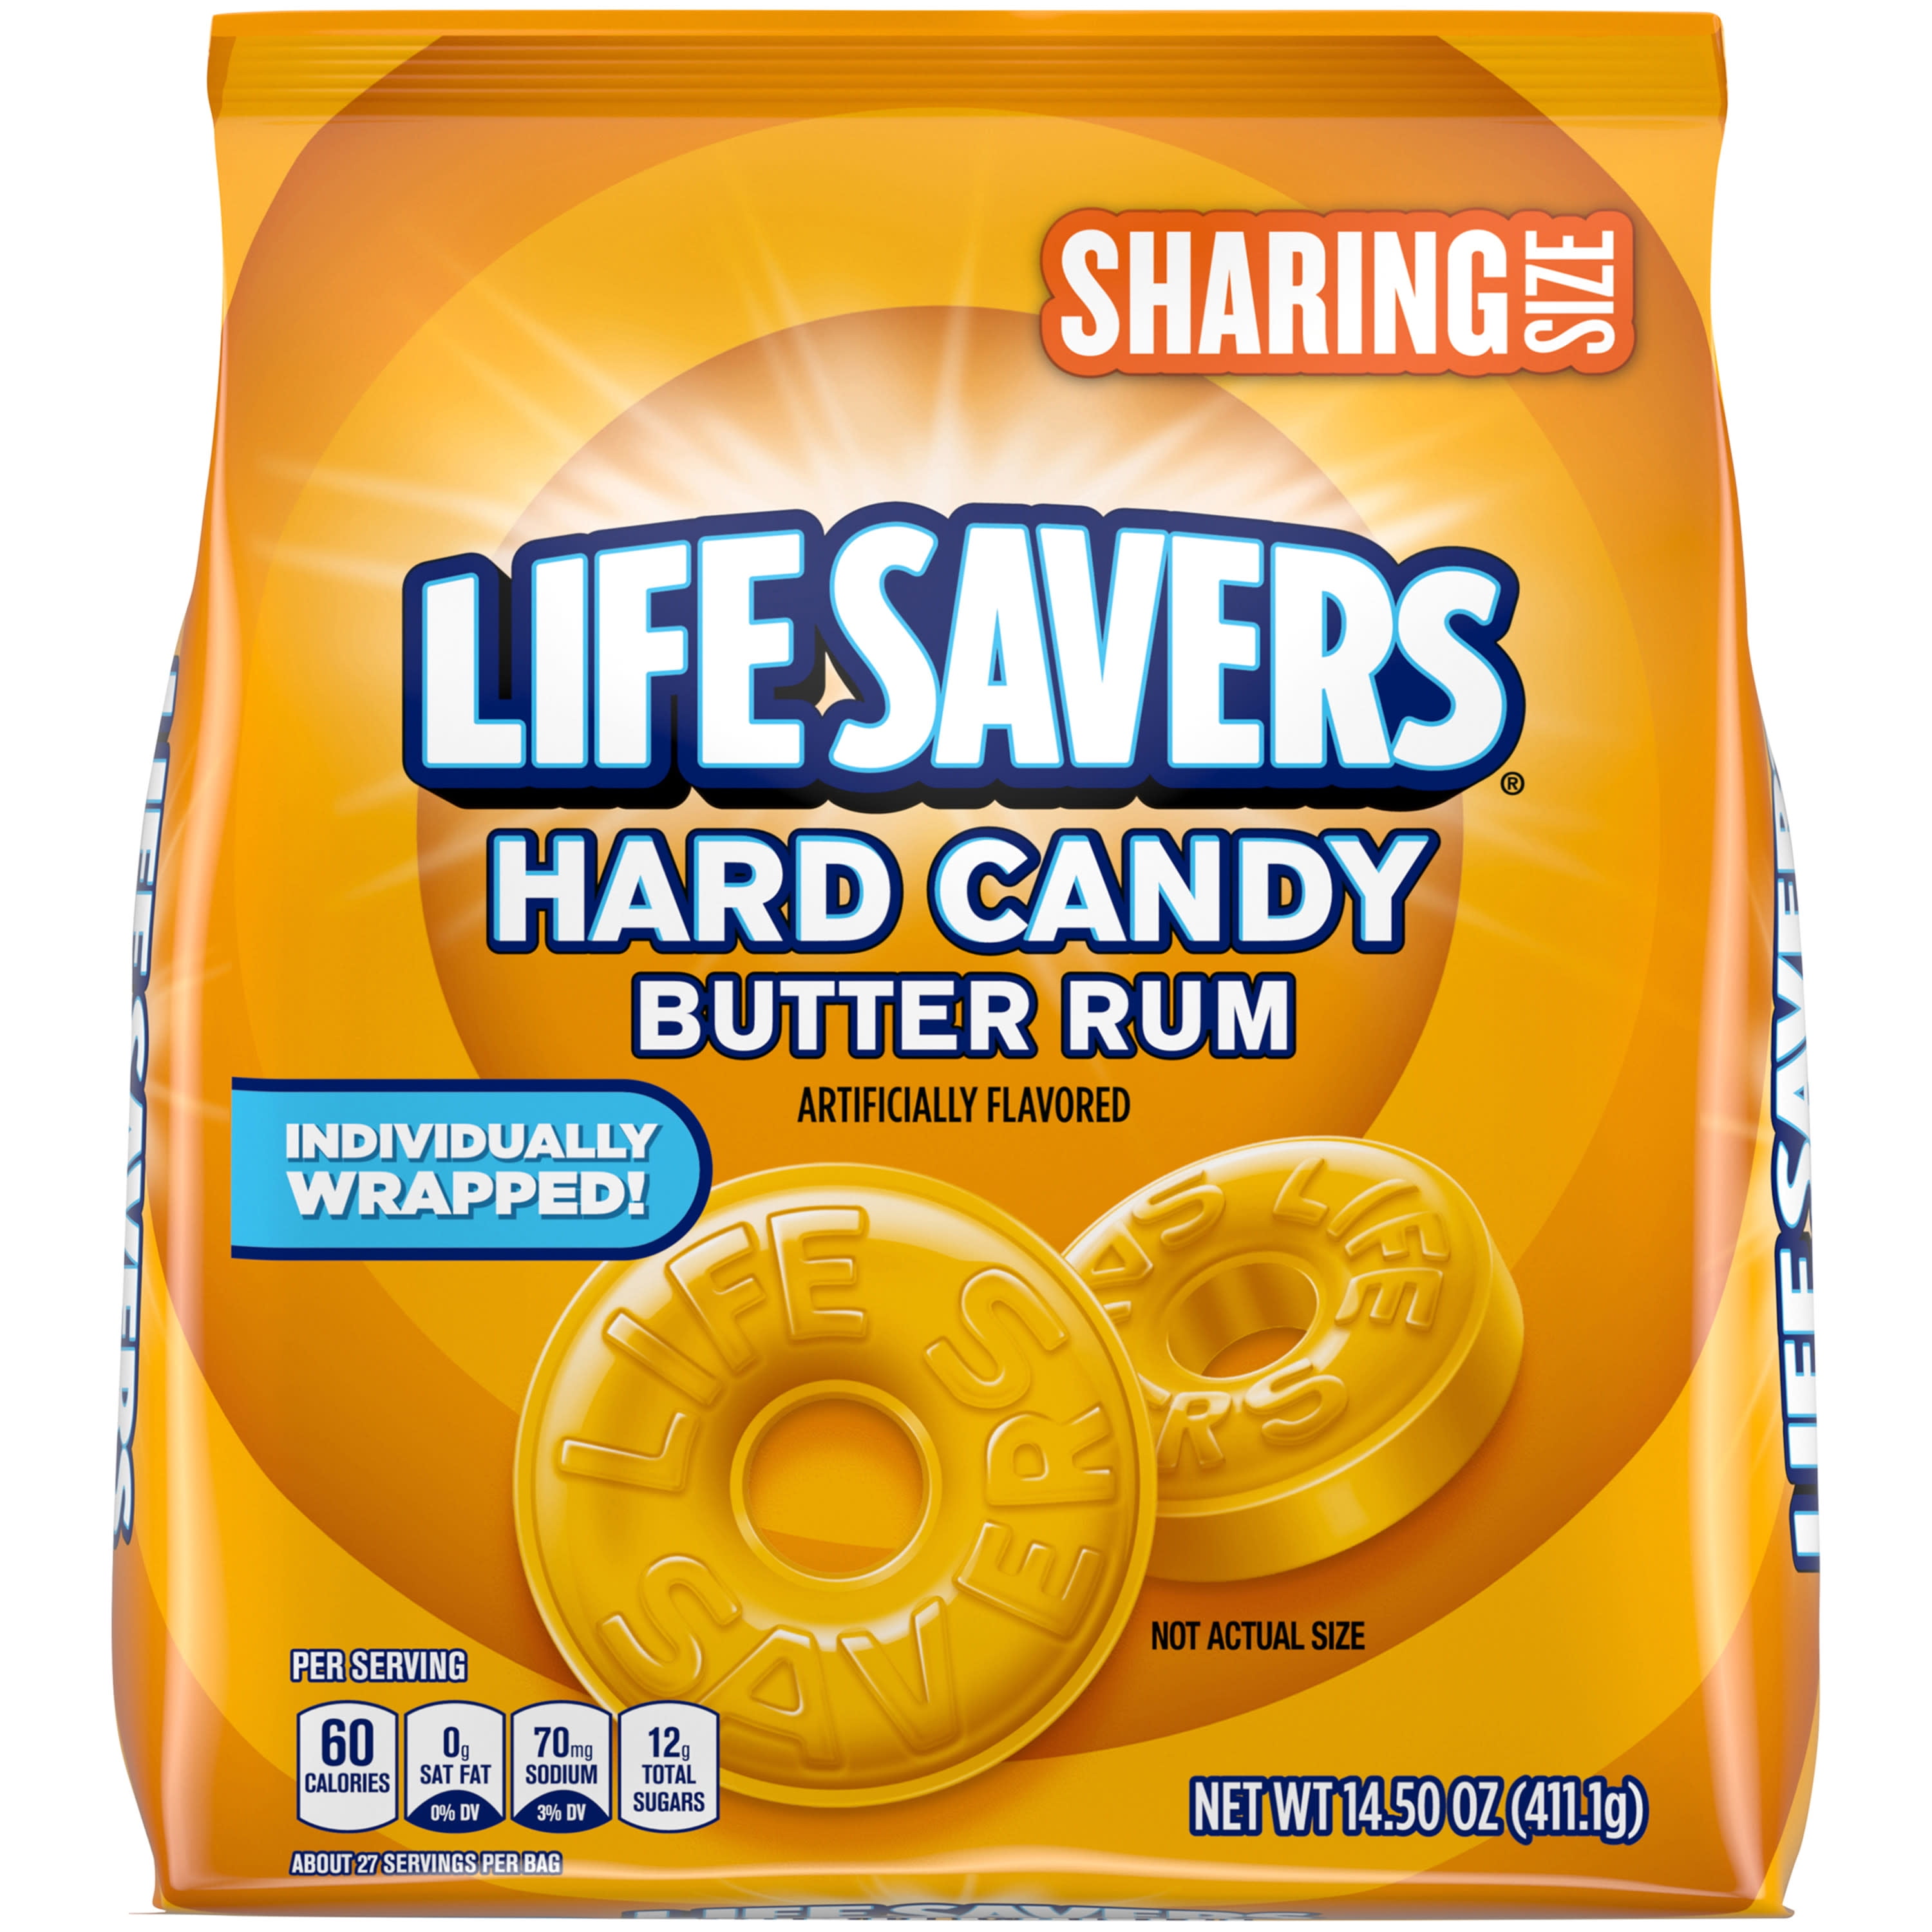 Life Savers Butter Rum Hard Candy Individually Wrapped, Sharing Size